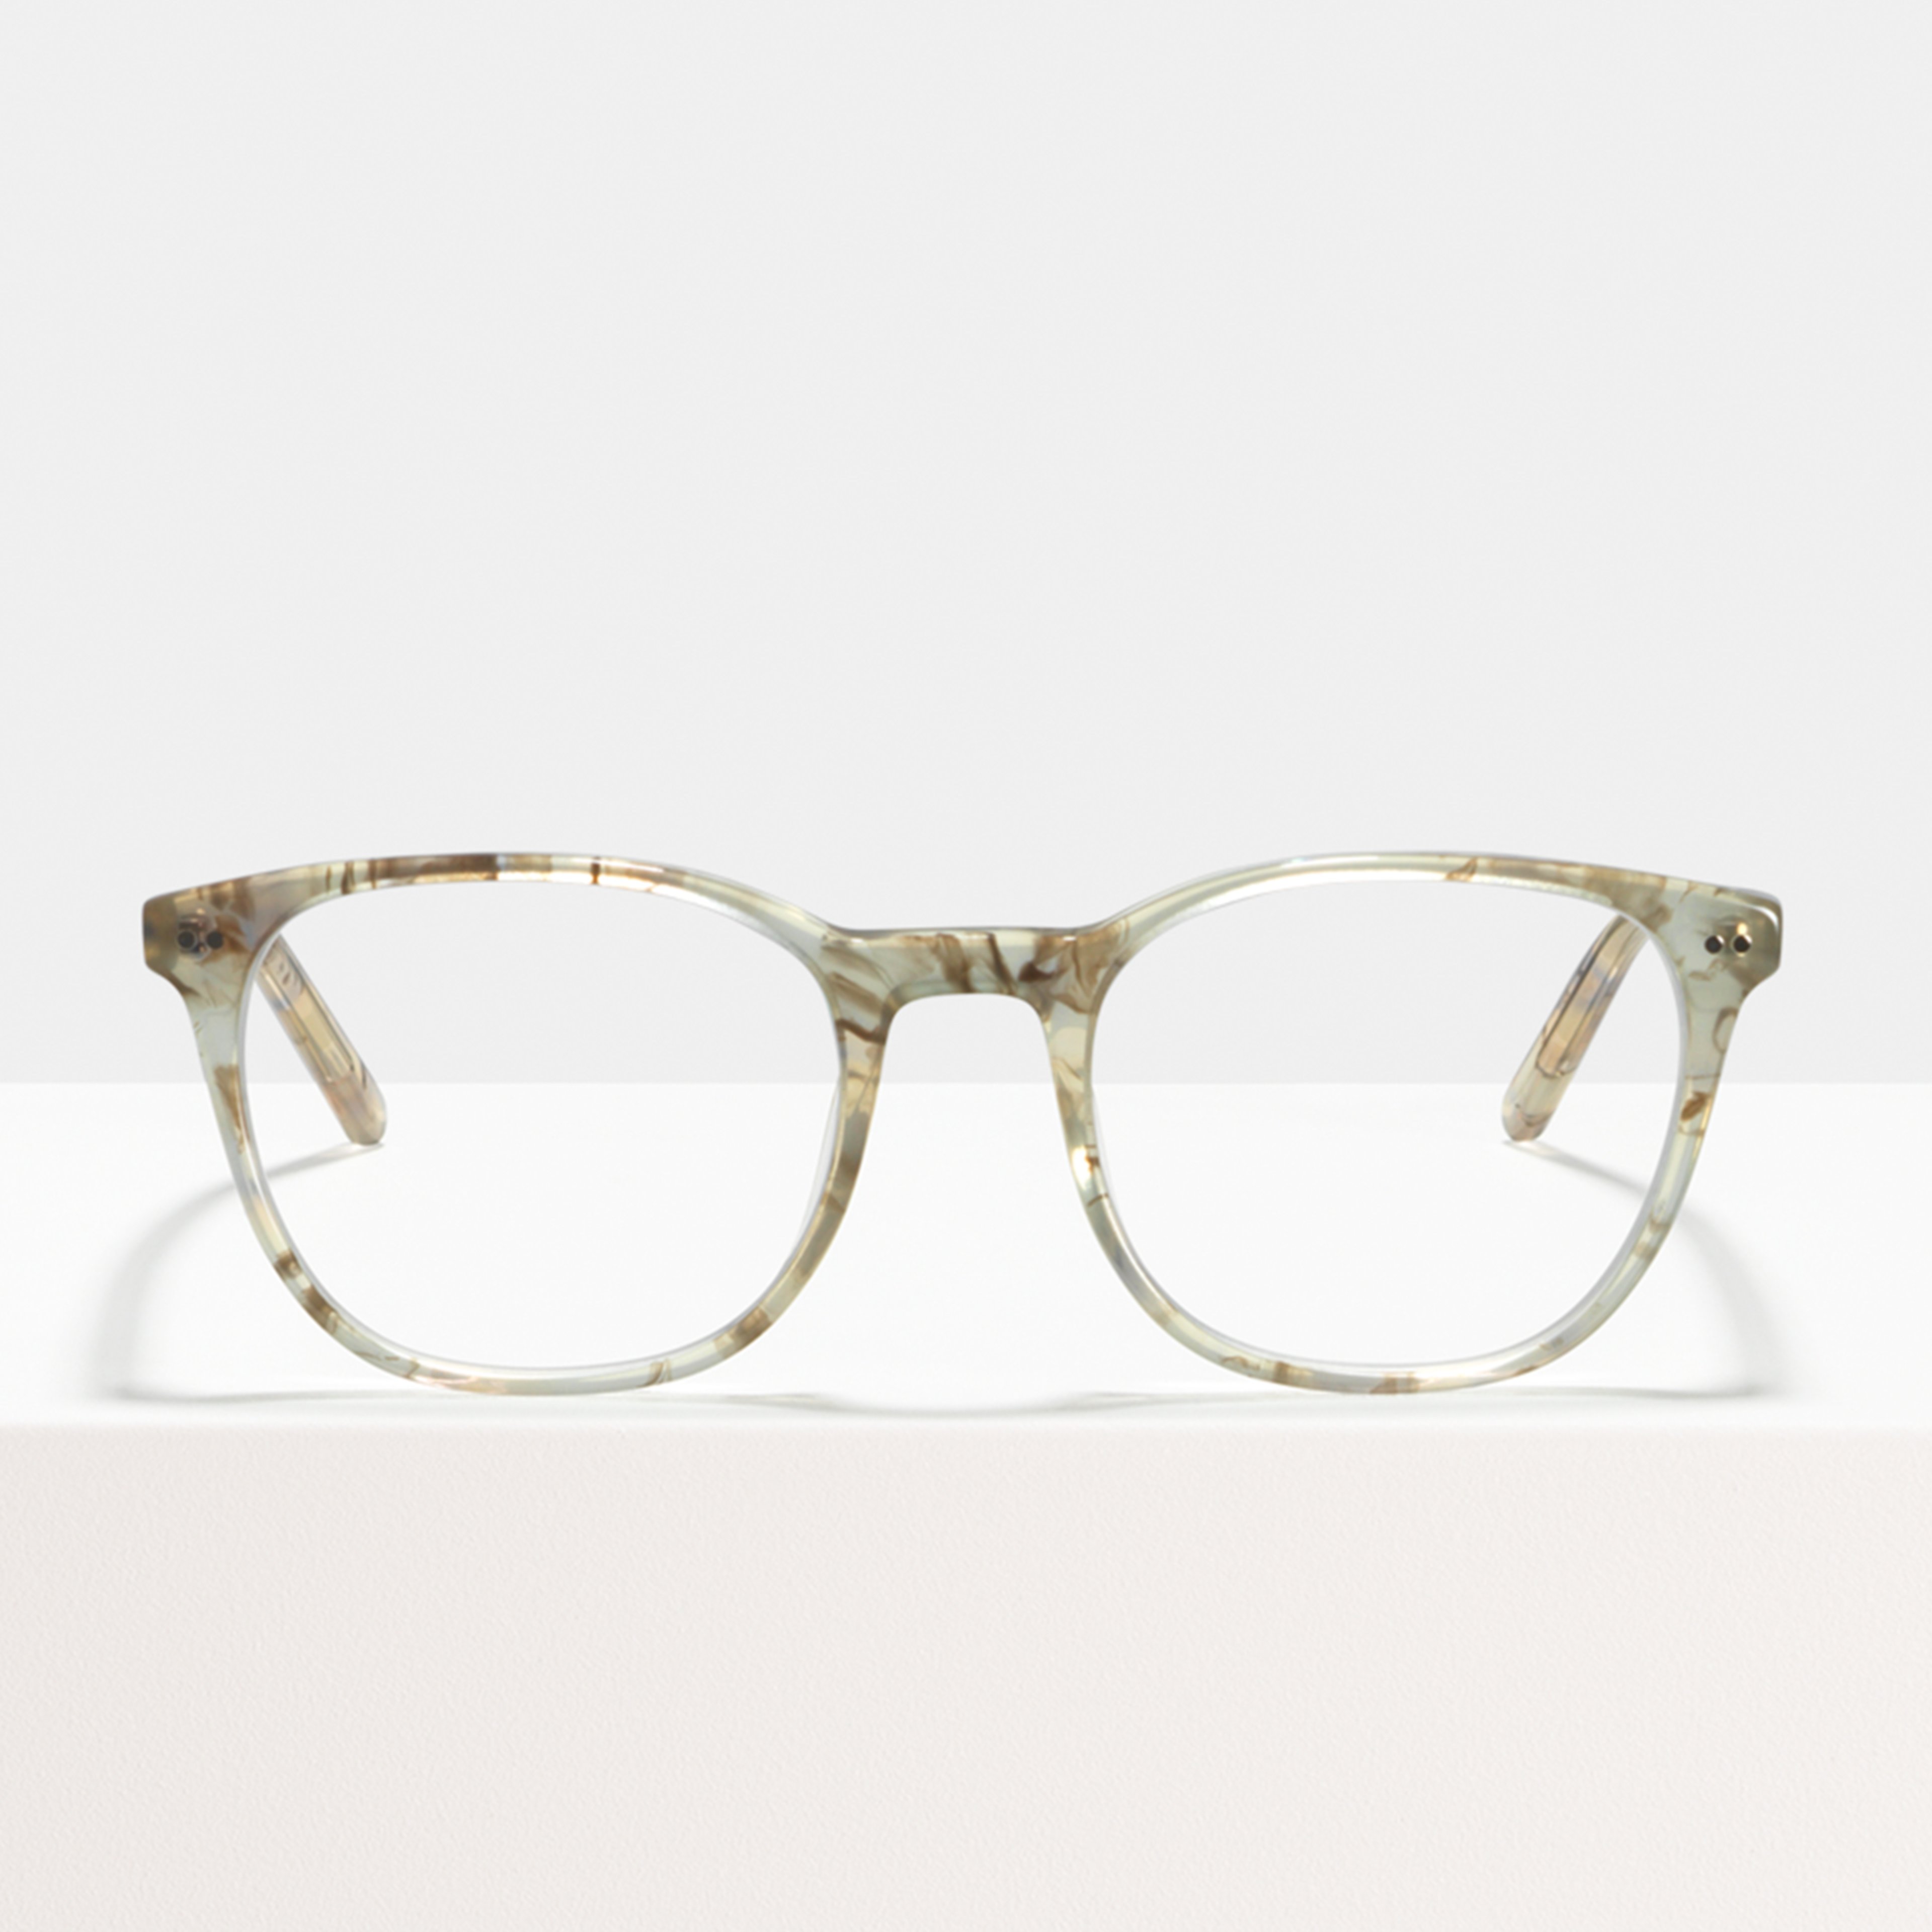 Ace & Tate Glasses | Square Acetate in Brown, Grey, White